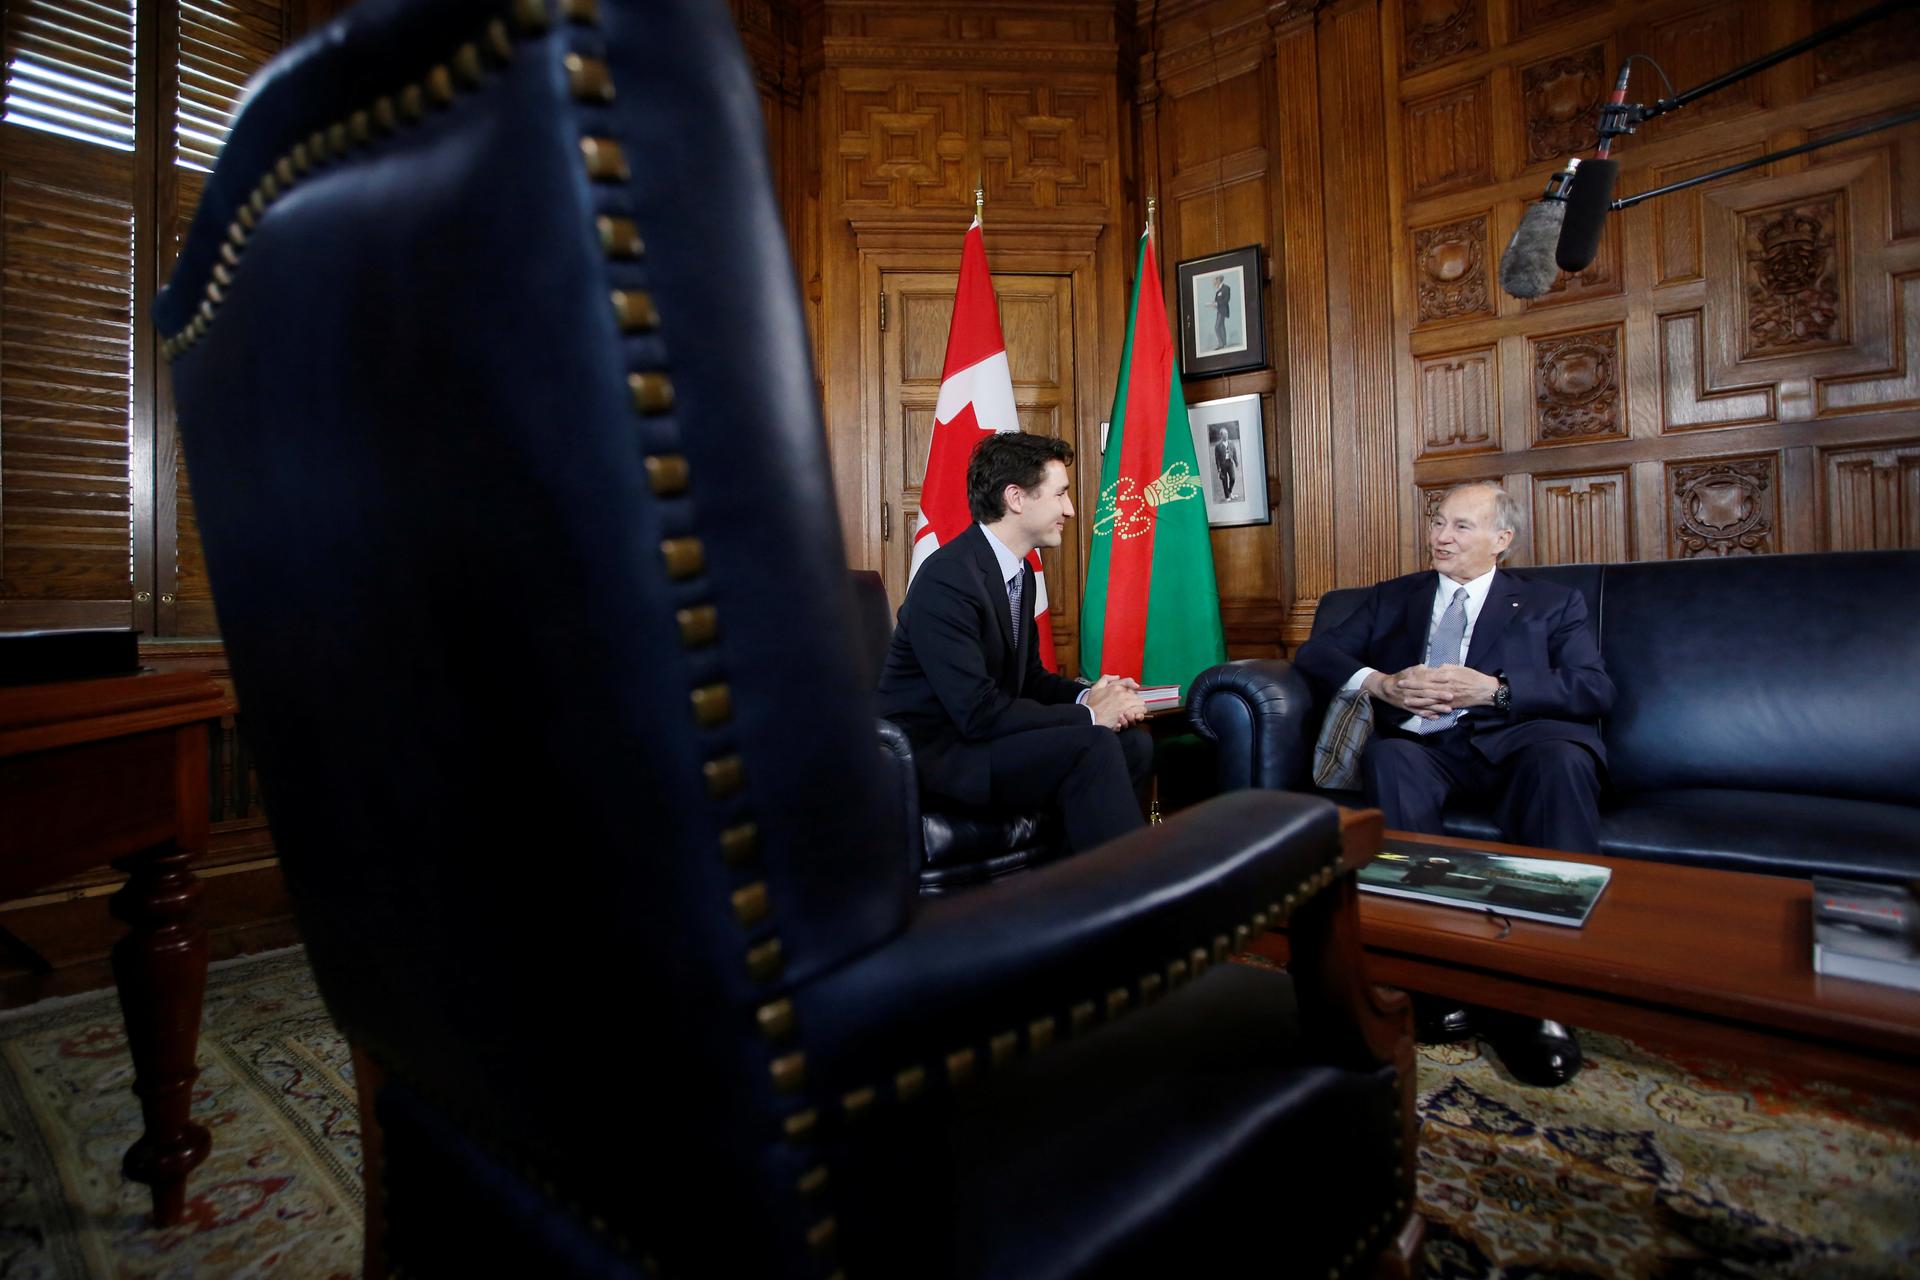 Canada's Prime Minister Justin Trudeau, left, meets with the Aga Khan